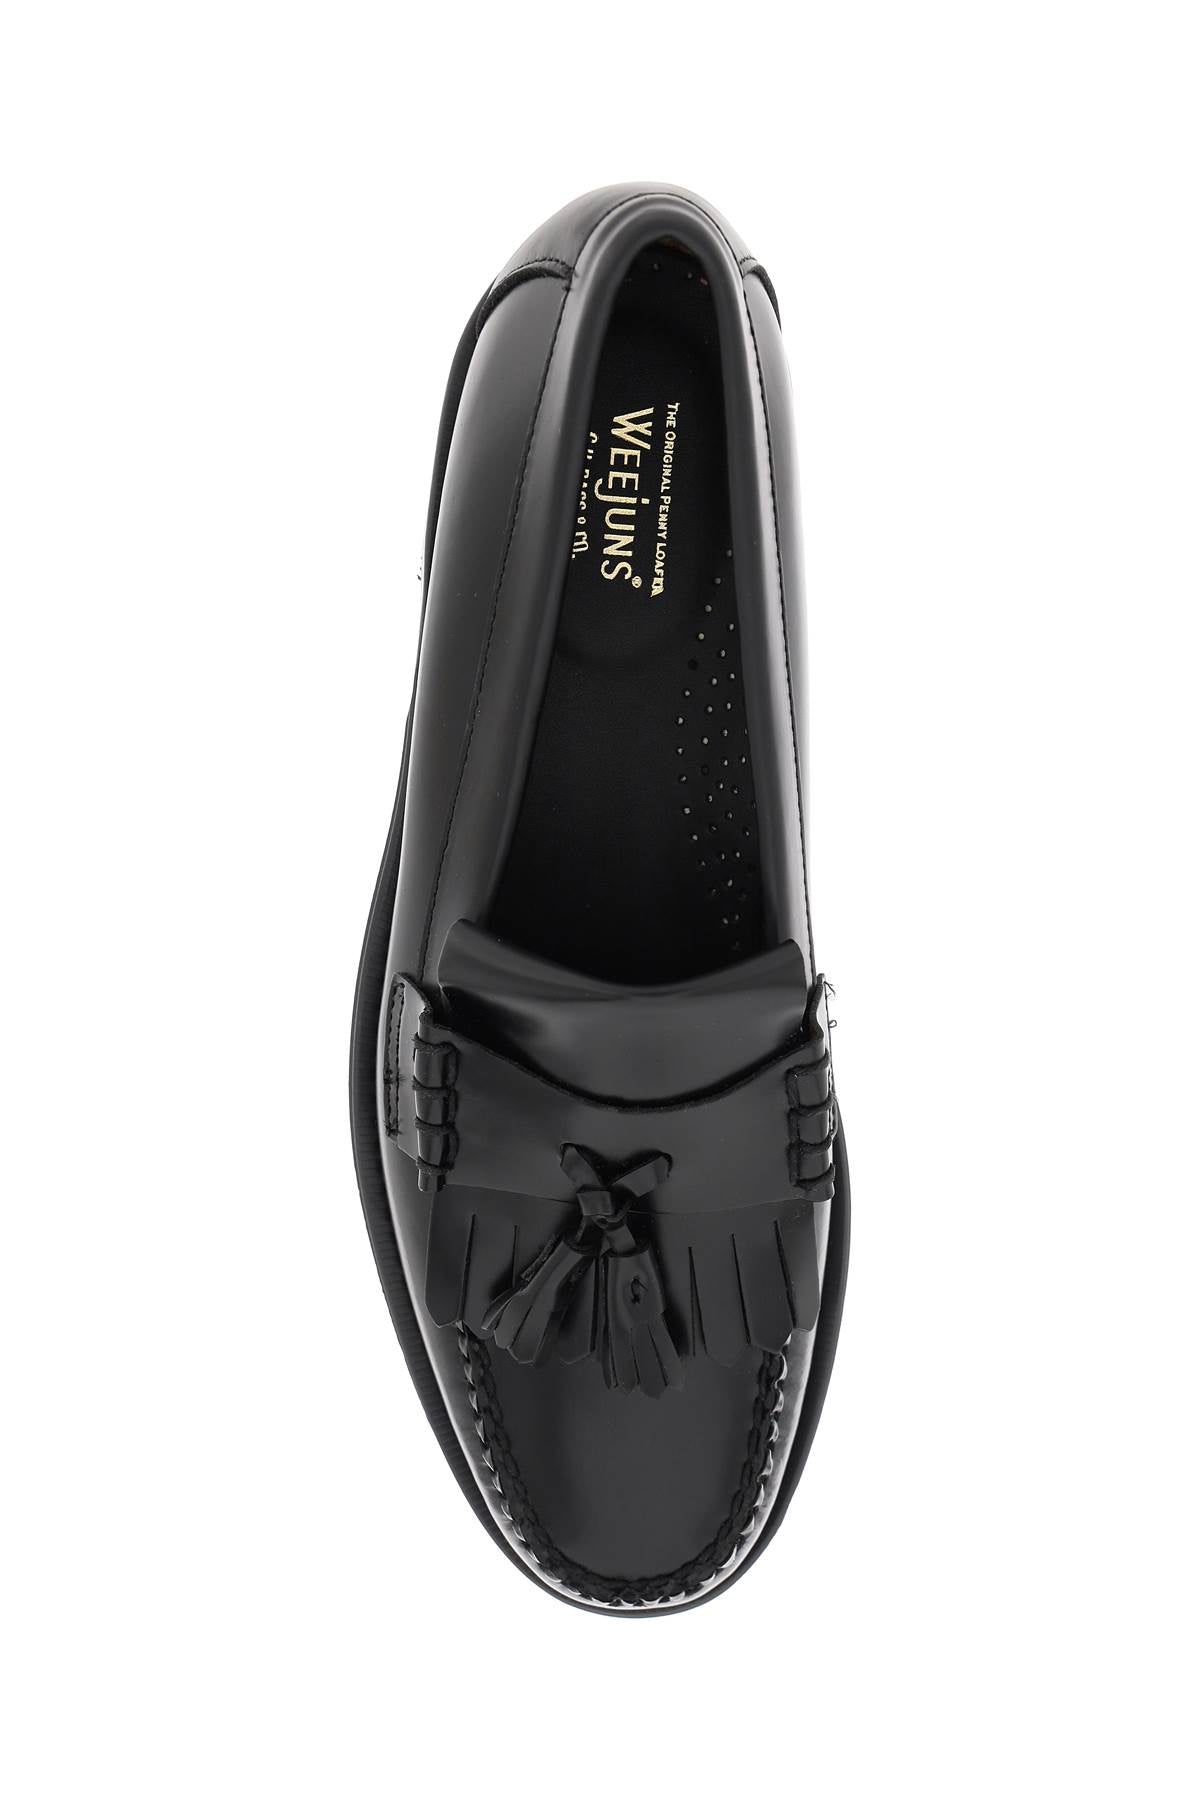 G.h. bass esther kiltie weejuns loafers-1